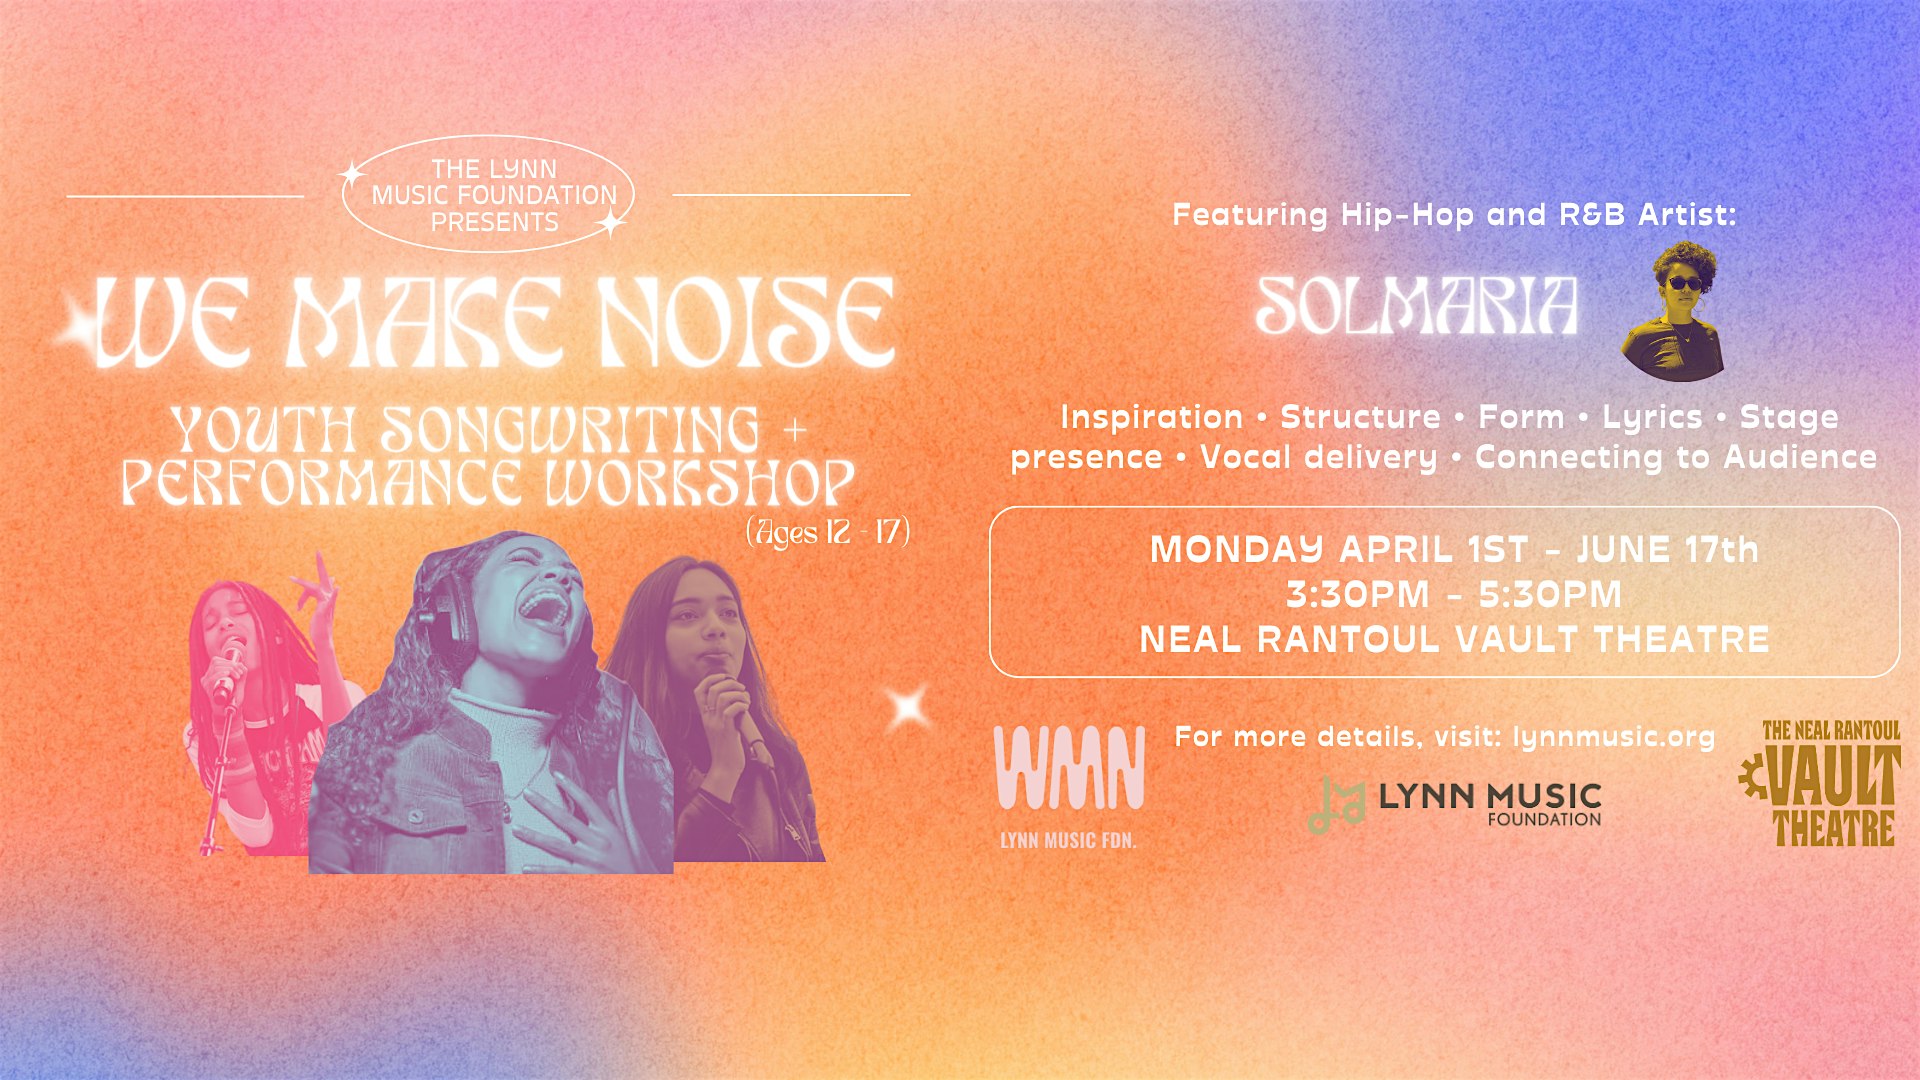 Join us for an exciting youth songwriting and performance workshop hosted by the Lynn Music Foundation at the Vault Theatre! Get ready to groove with hip-hop and R&B superstar, Sol Maria. Perfect for young music enthusiasts looking to sharpen their skills and explore creativity. Don't miss this unique opportunity to learn, grow, and shine in your love for music!